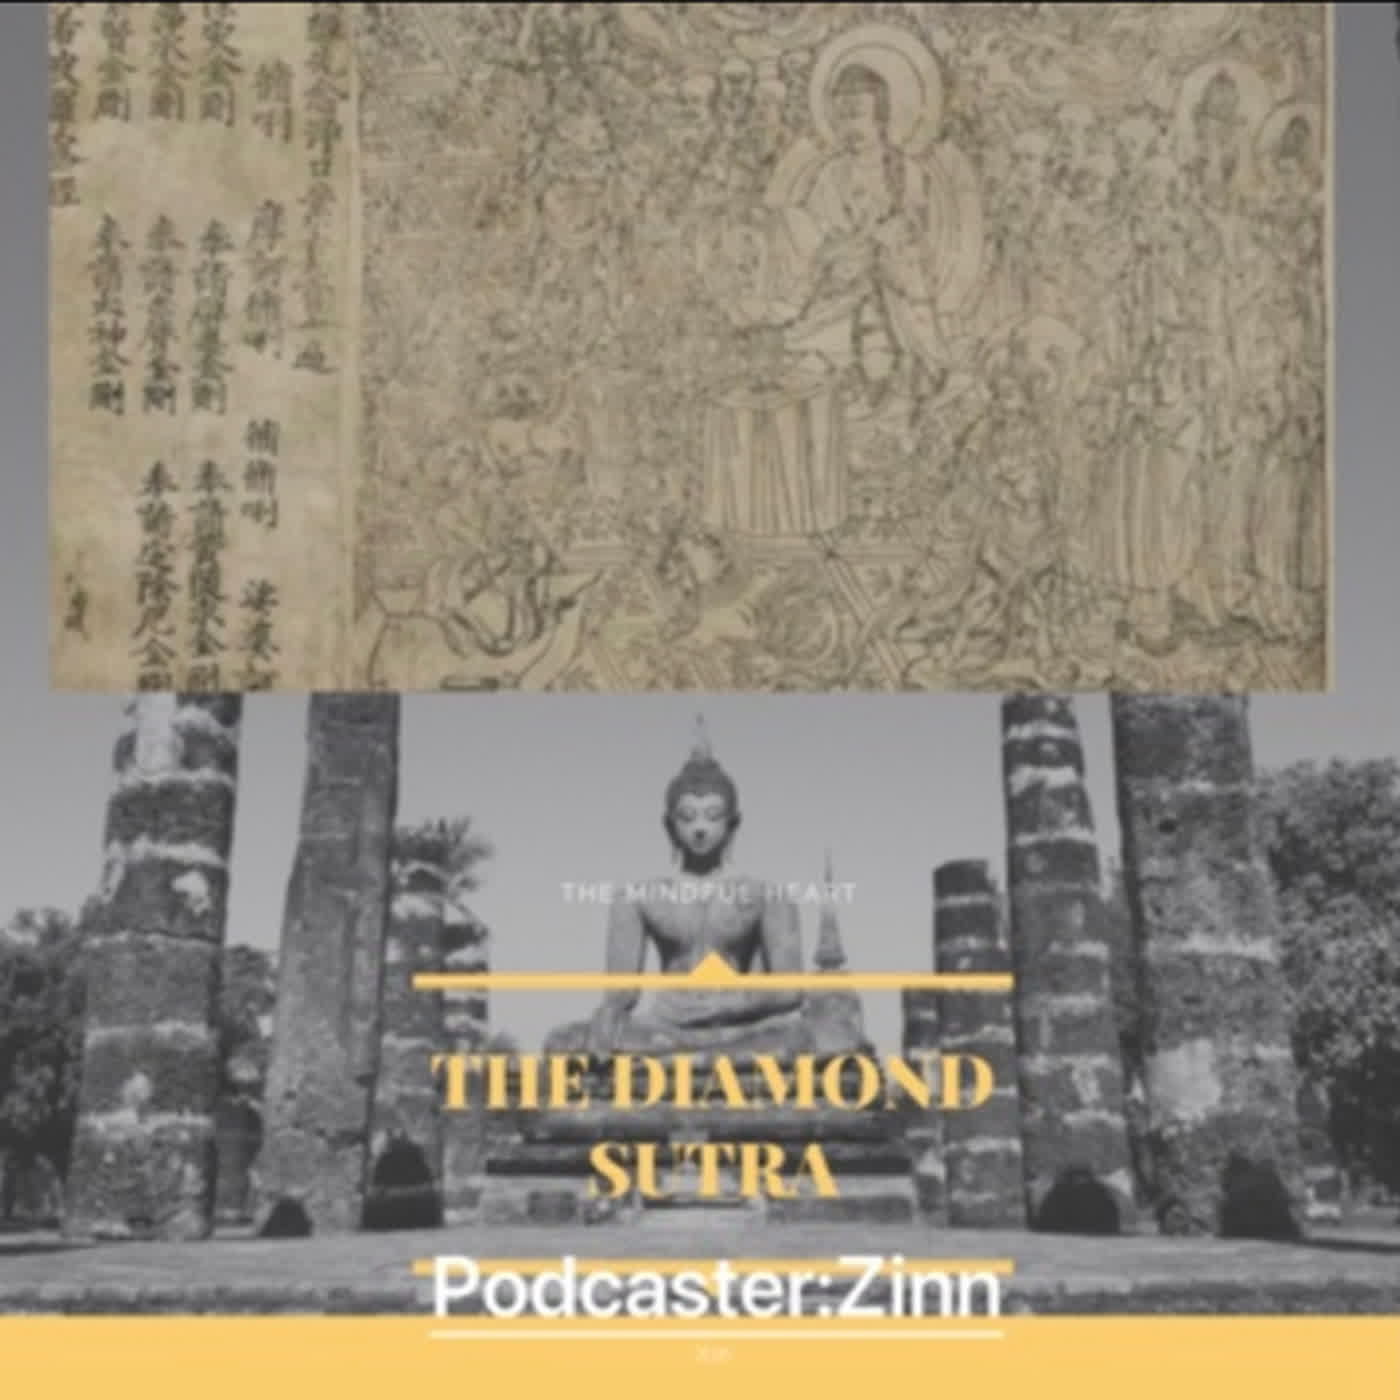 The Diamond Sutra and 20mins sitting meditation for supreme perfect enlightenment